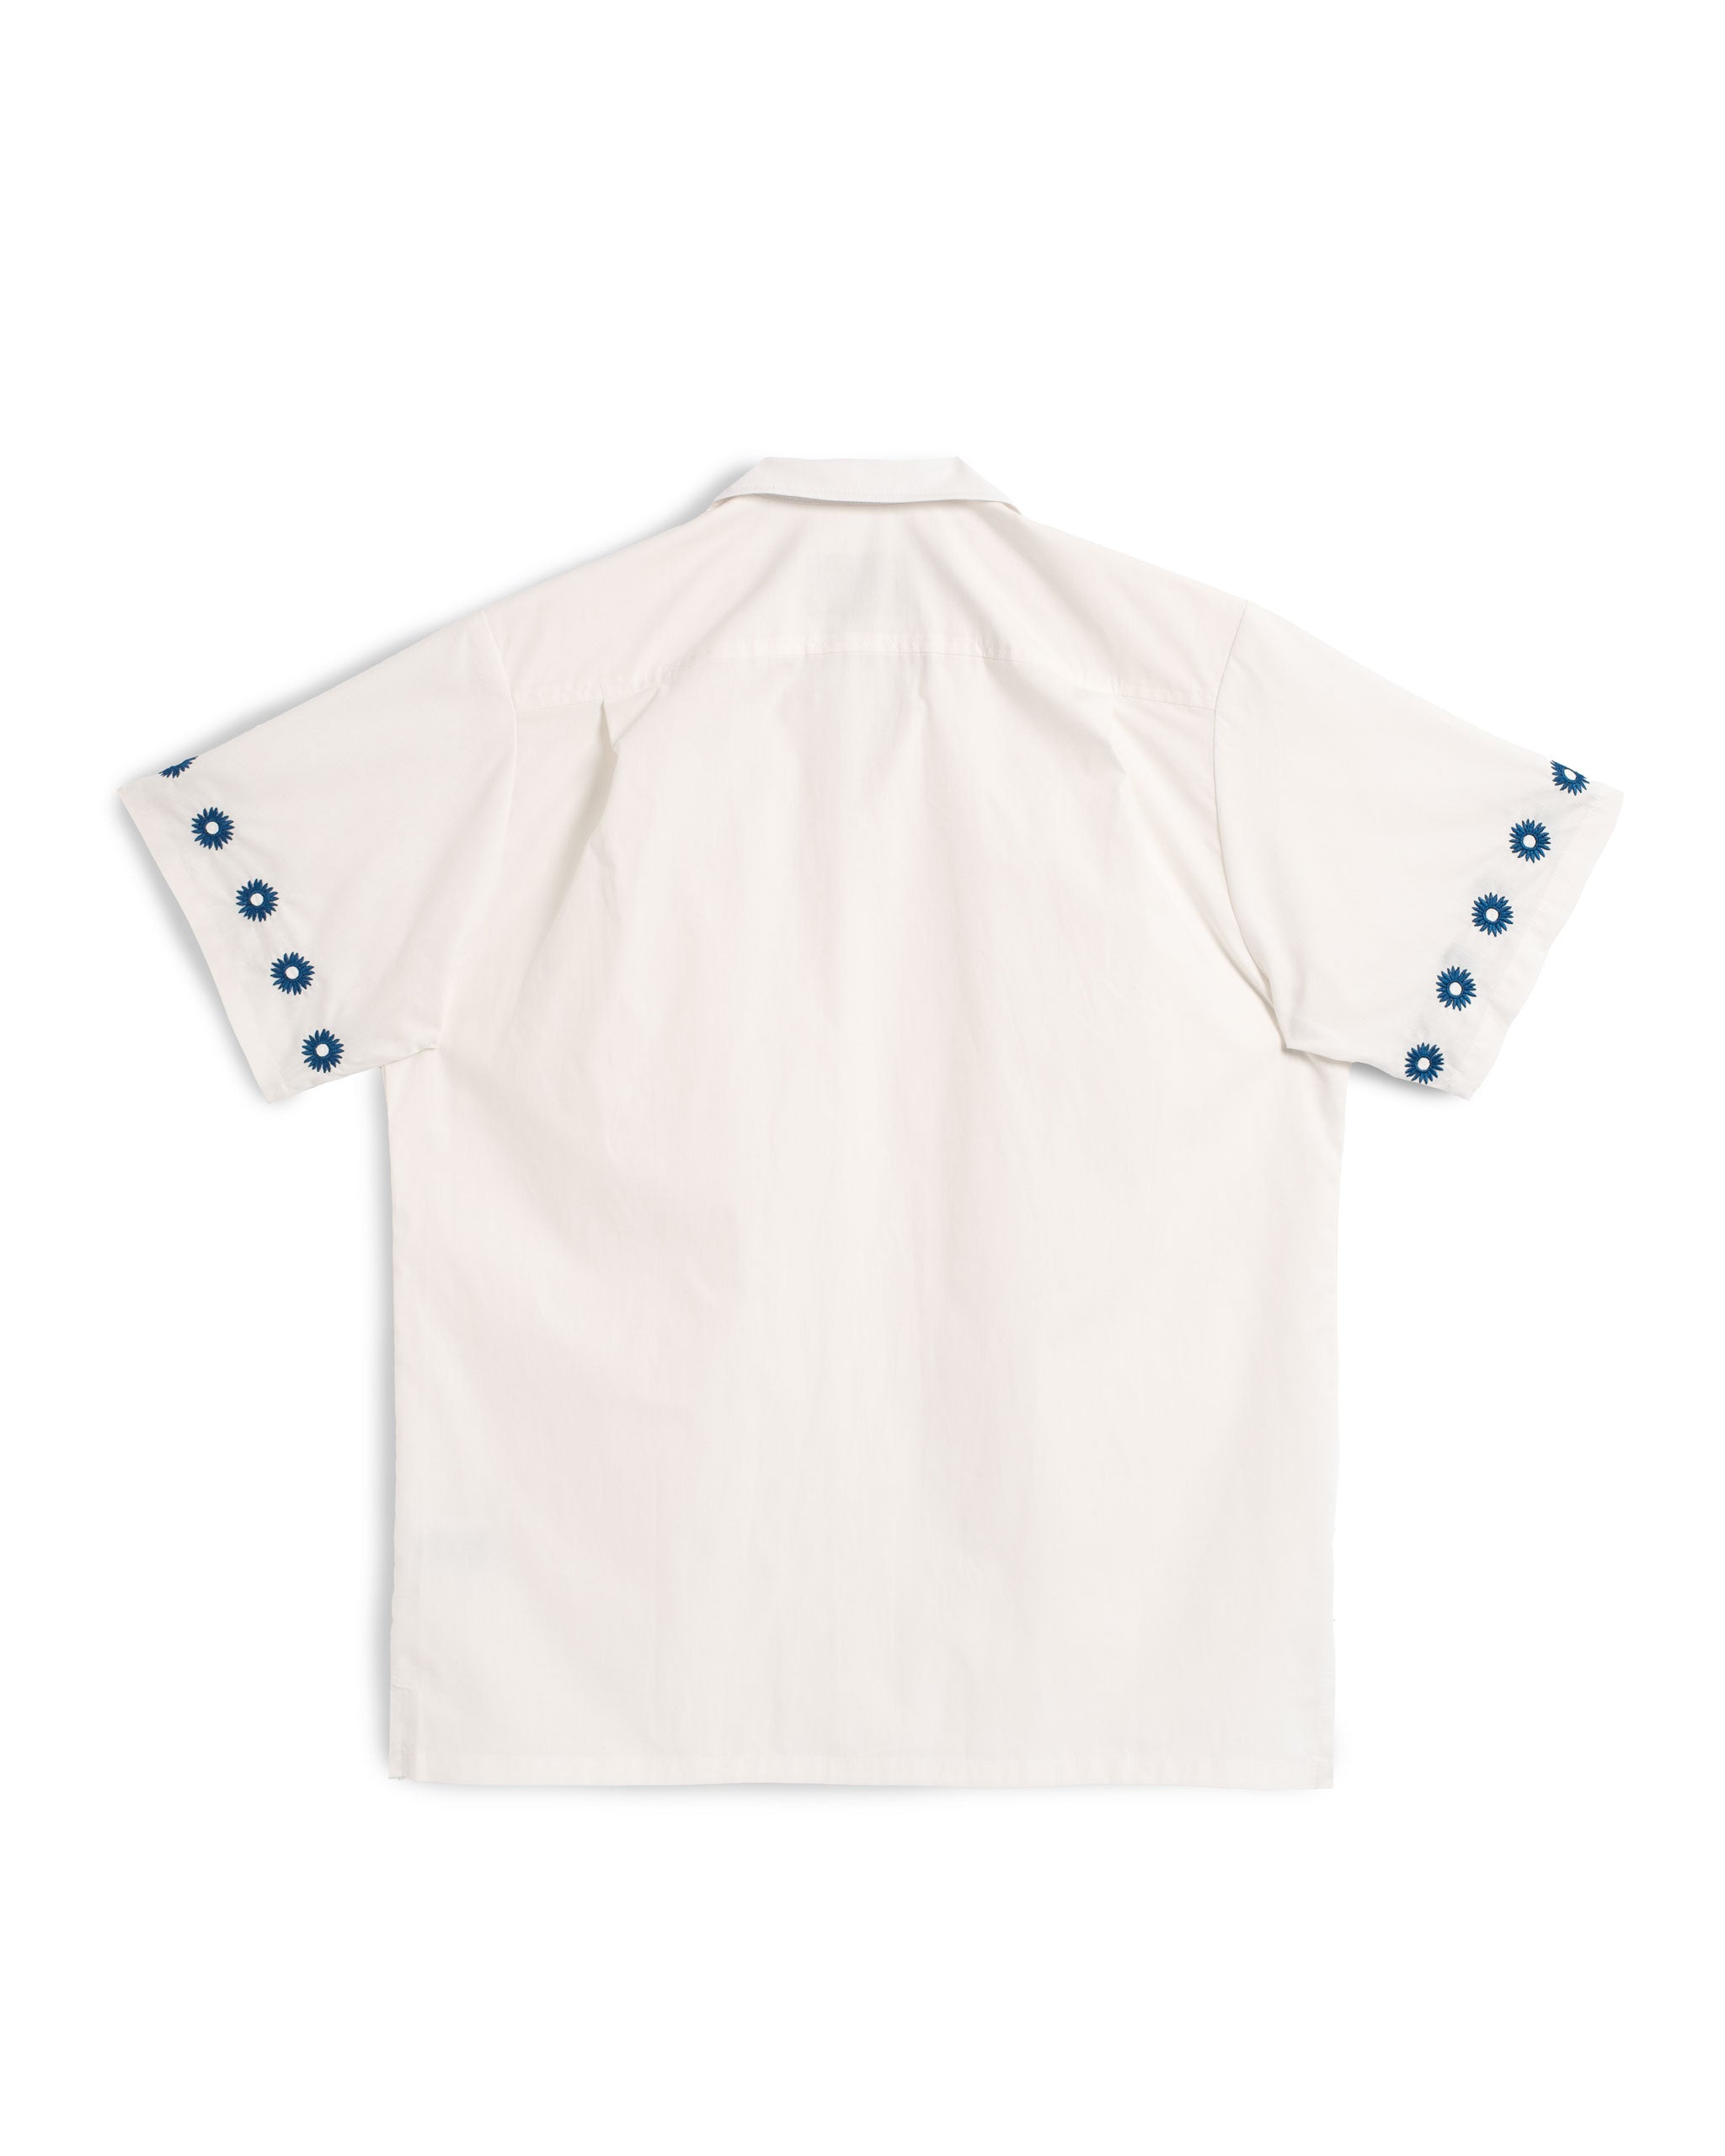 White Embroidered Daisy Camp Shirt